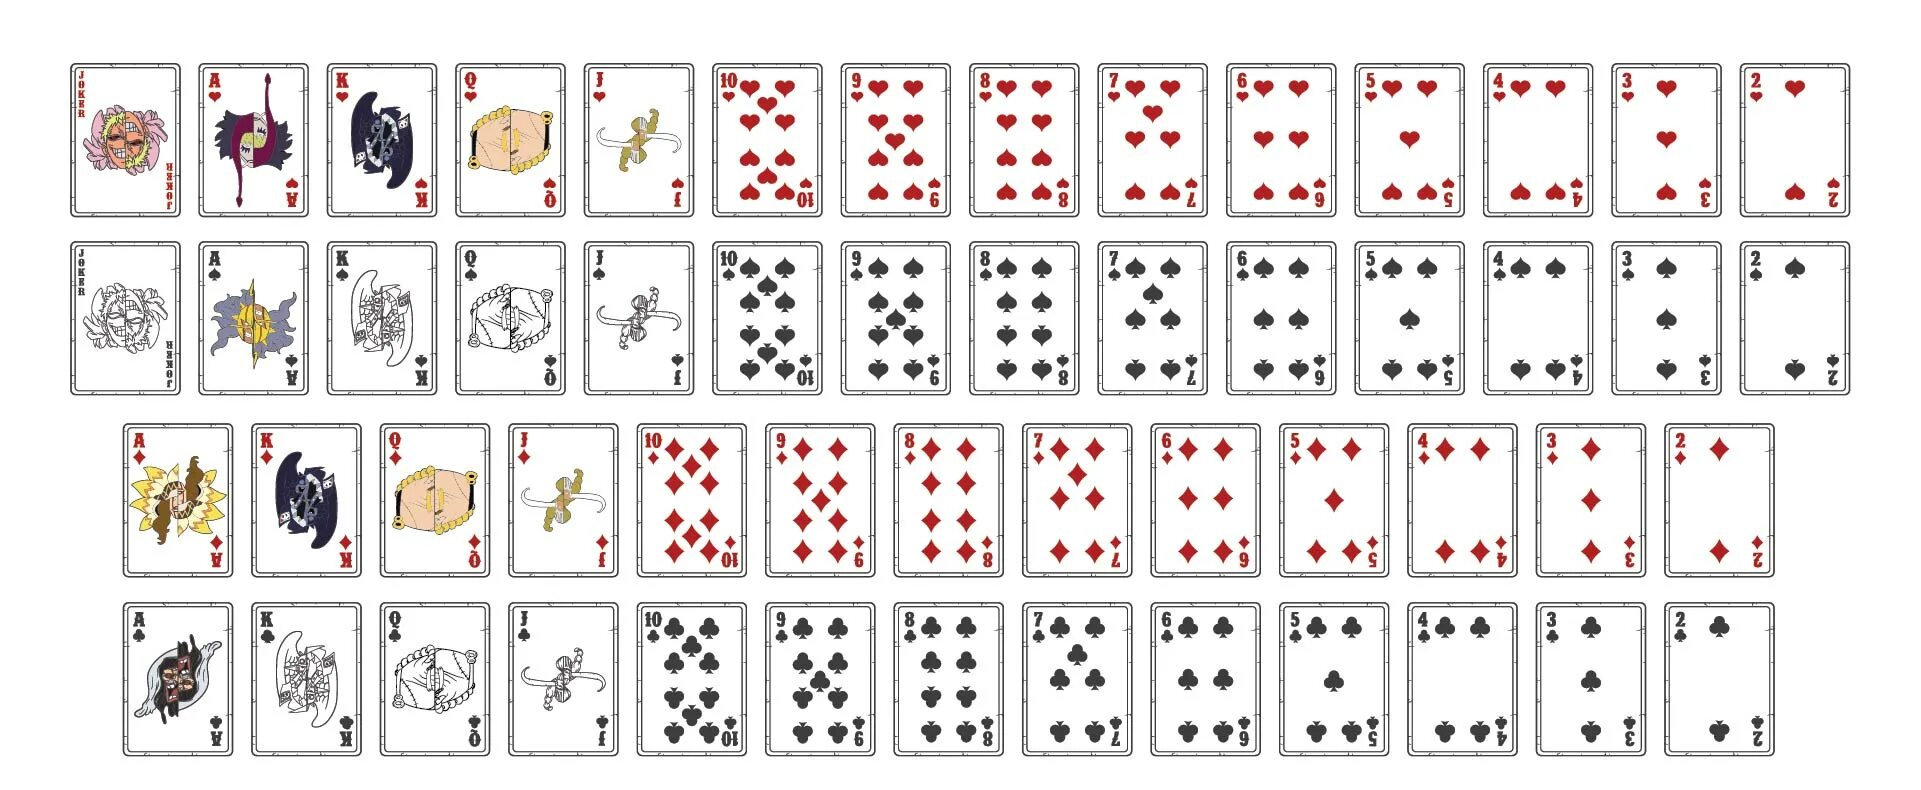 Printable cards. All Cards to Print Bura. The game of Life Cards Printable.